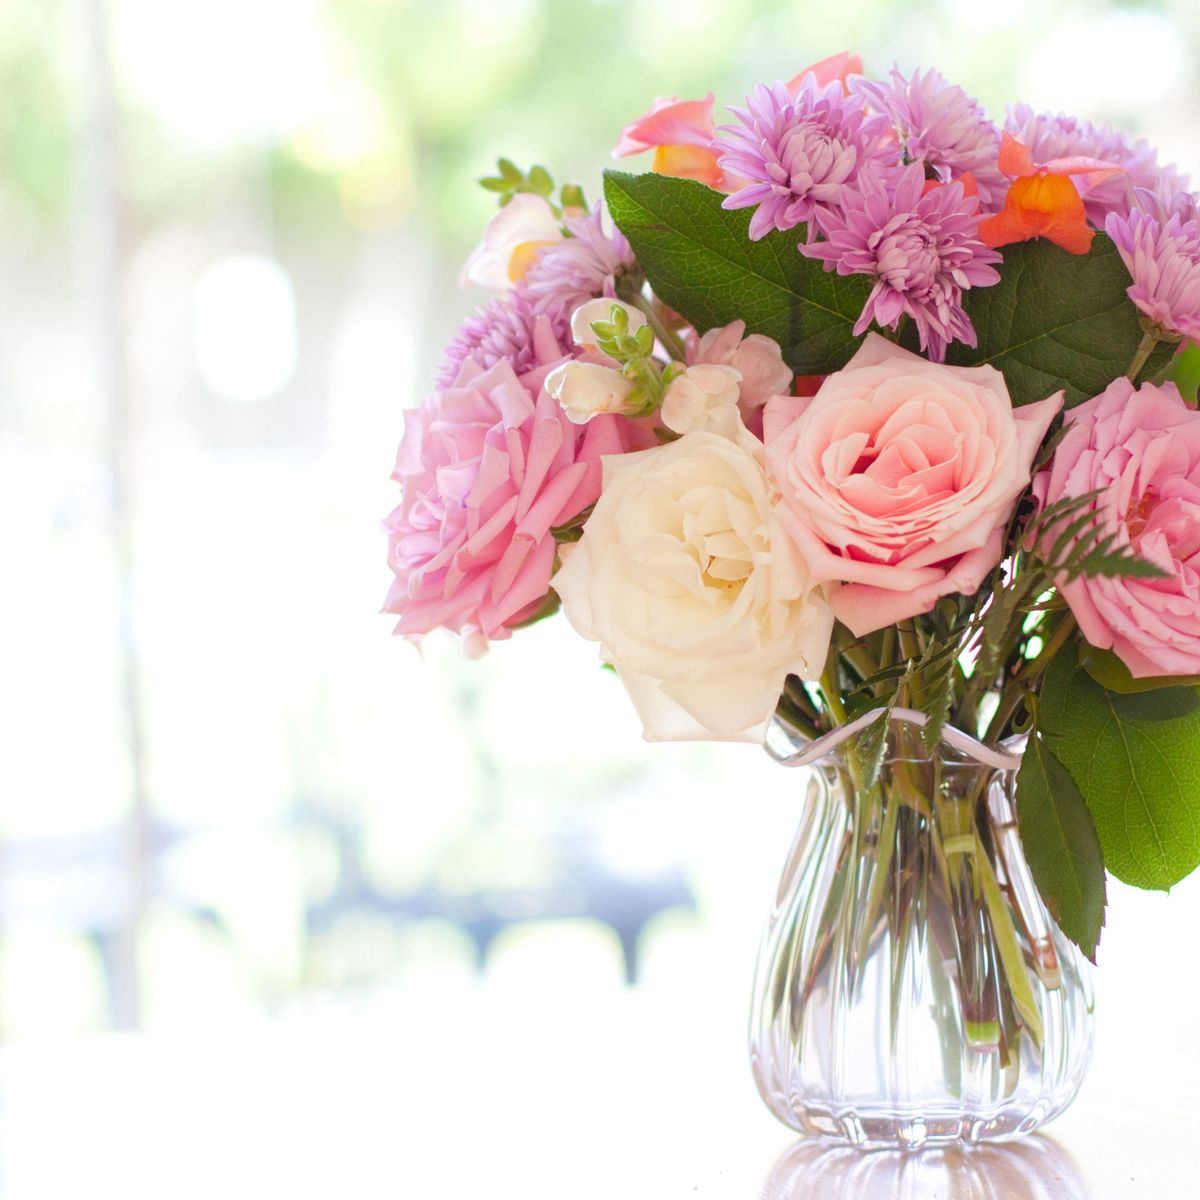 14 Flower Arranging Tips, According to Florists